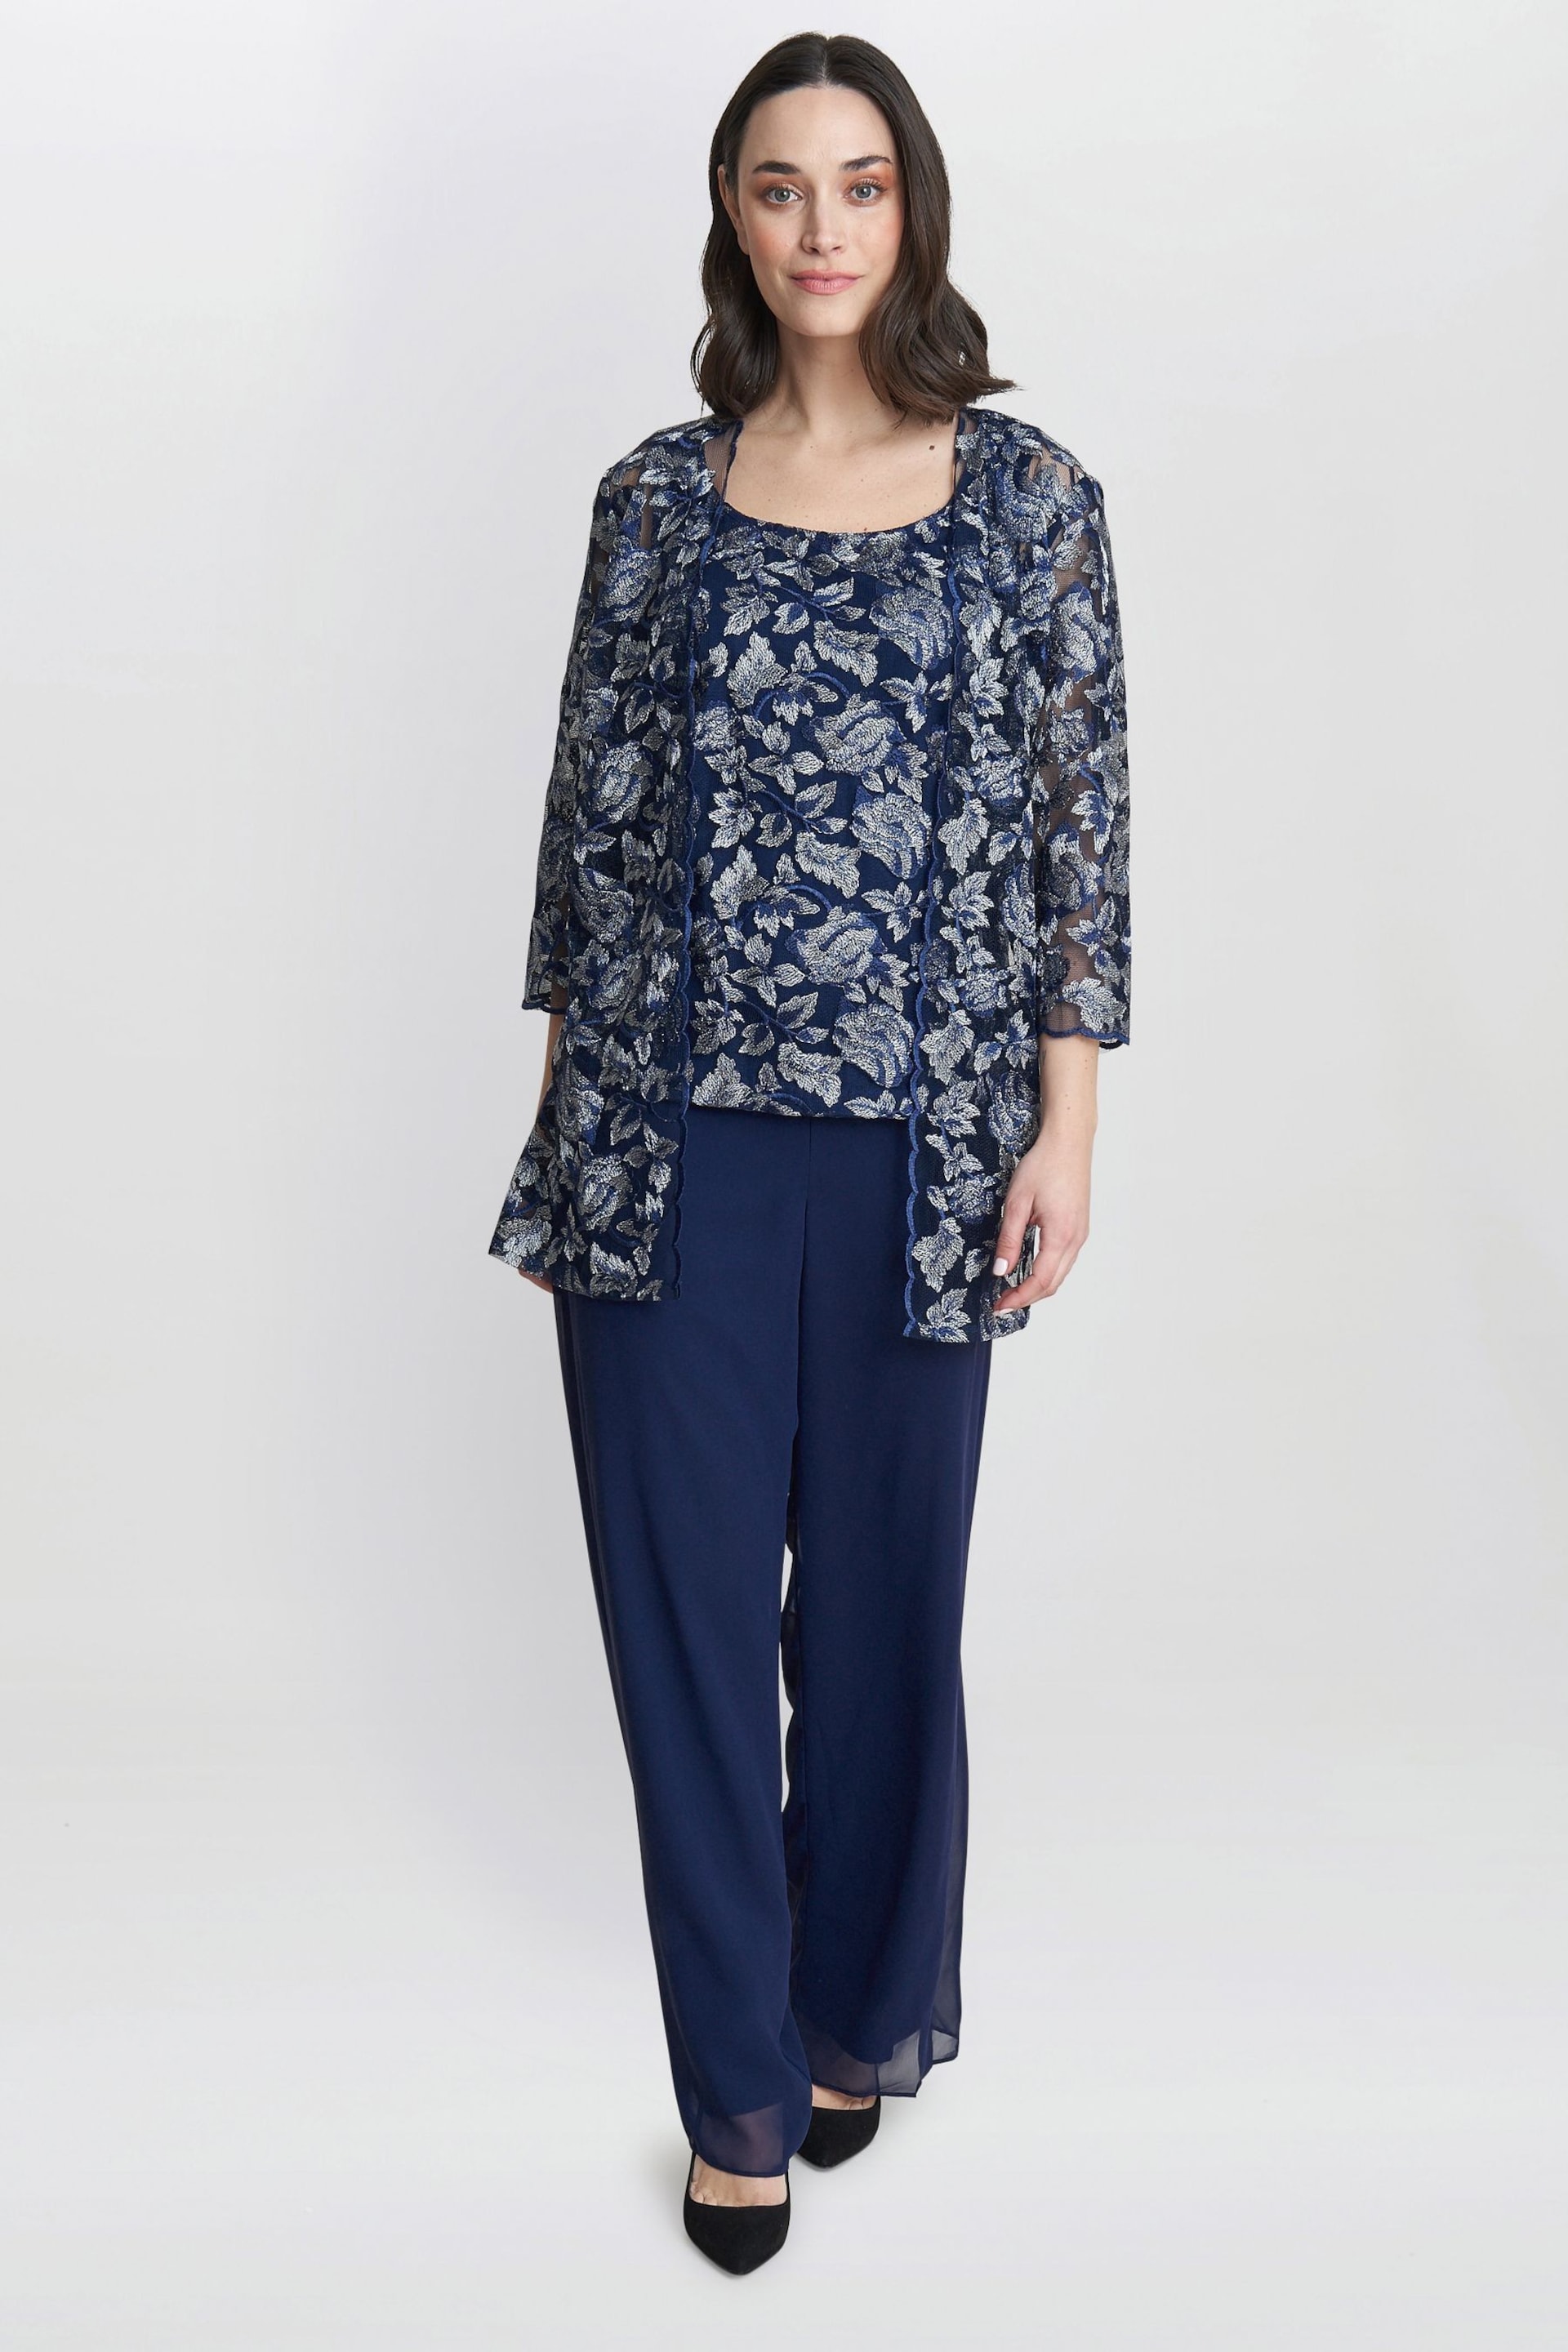 Gina Bacconi Blue Nikki 3 Piece Trousers Suit: With Embroidered Tank Top And Elongated Jacket - Image 3 of 6